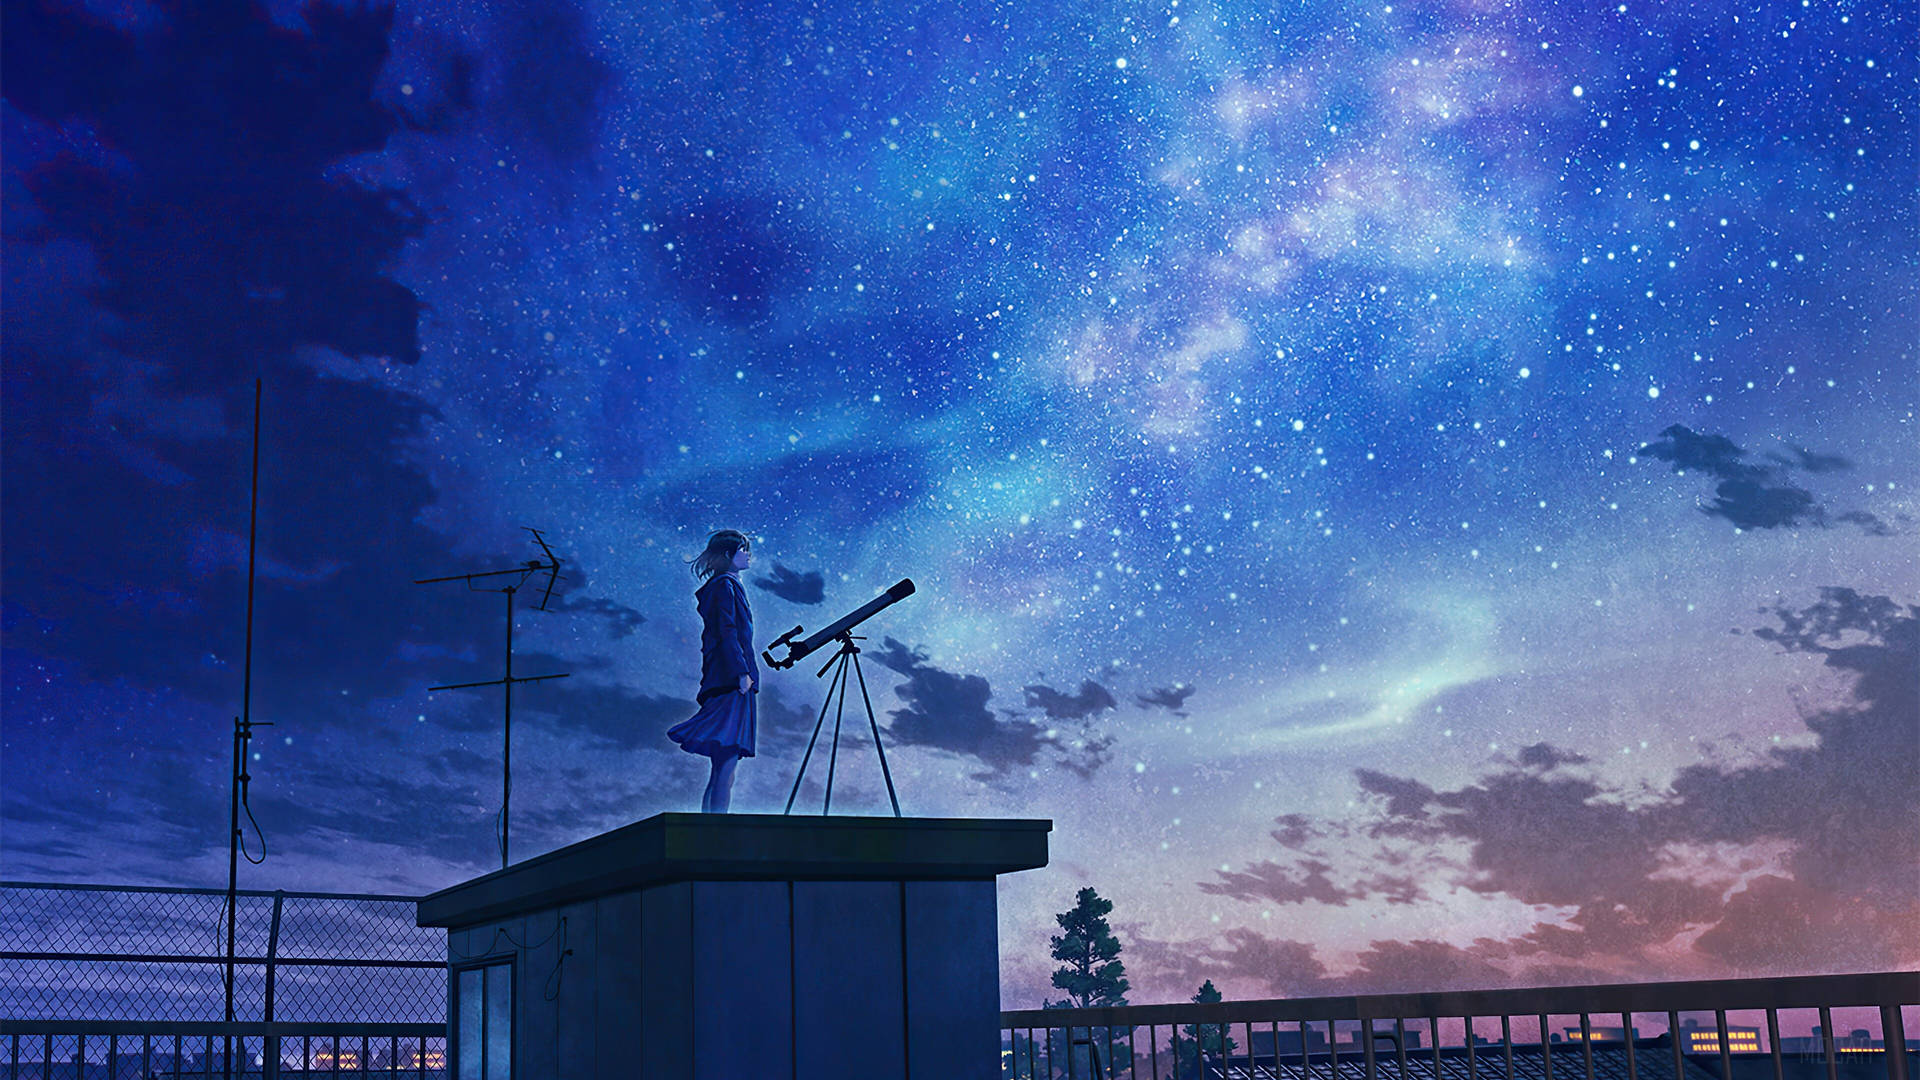 Animation Anime Girl Watching Stars With Telescope Wallpaper